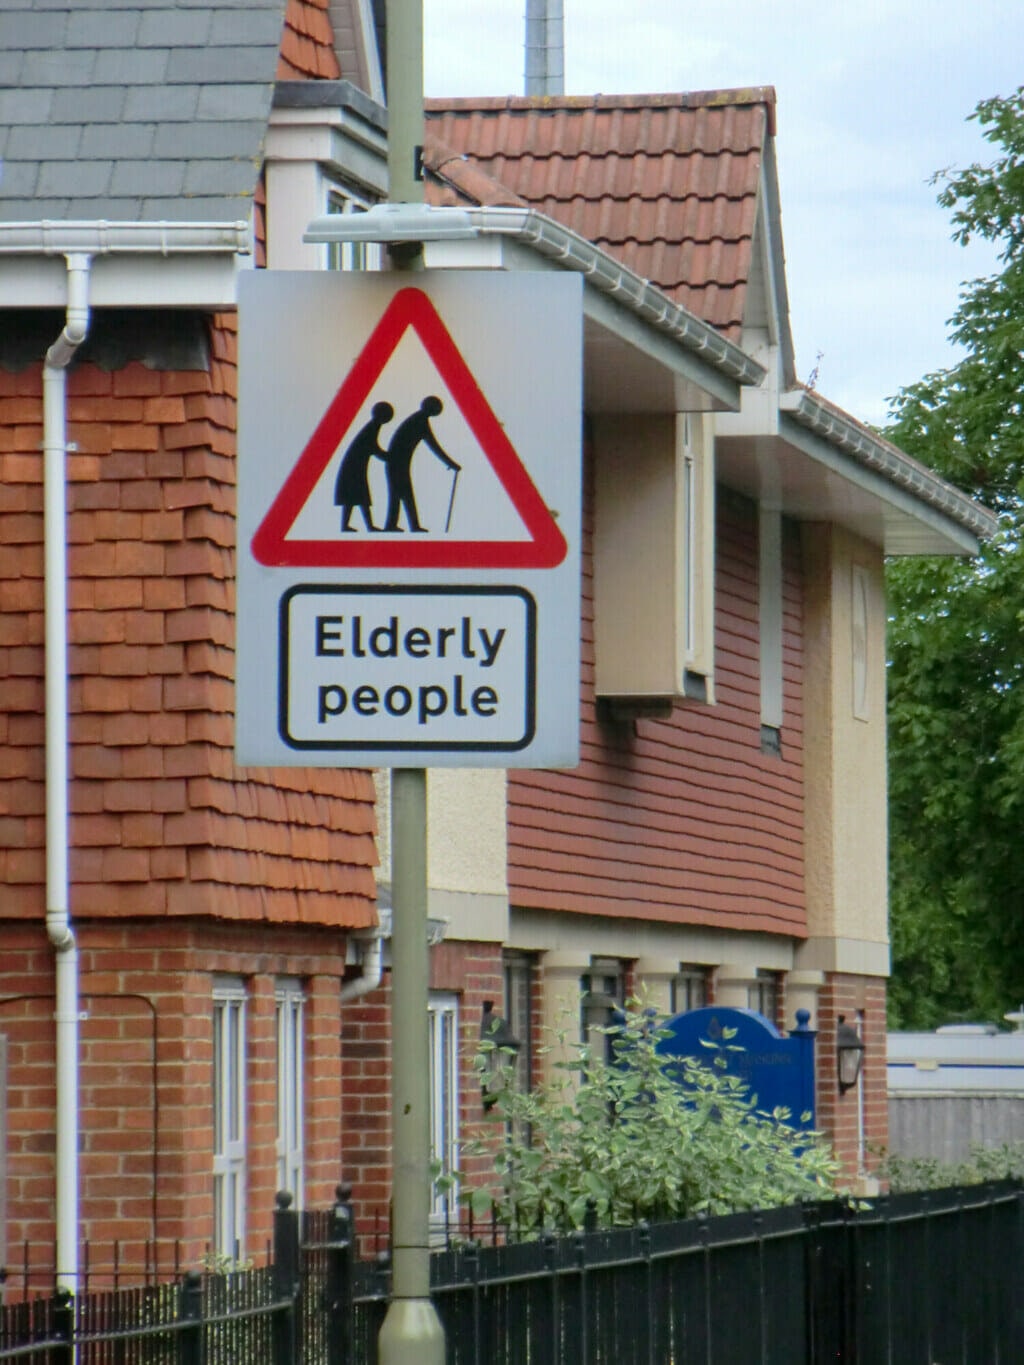 Road sign warning incoming drivers to drive with caution due to elderly people in the area. 